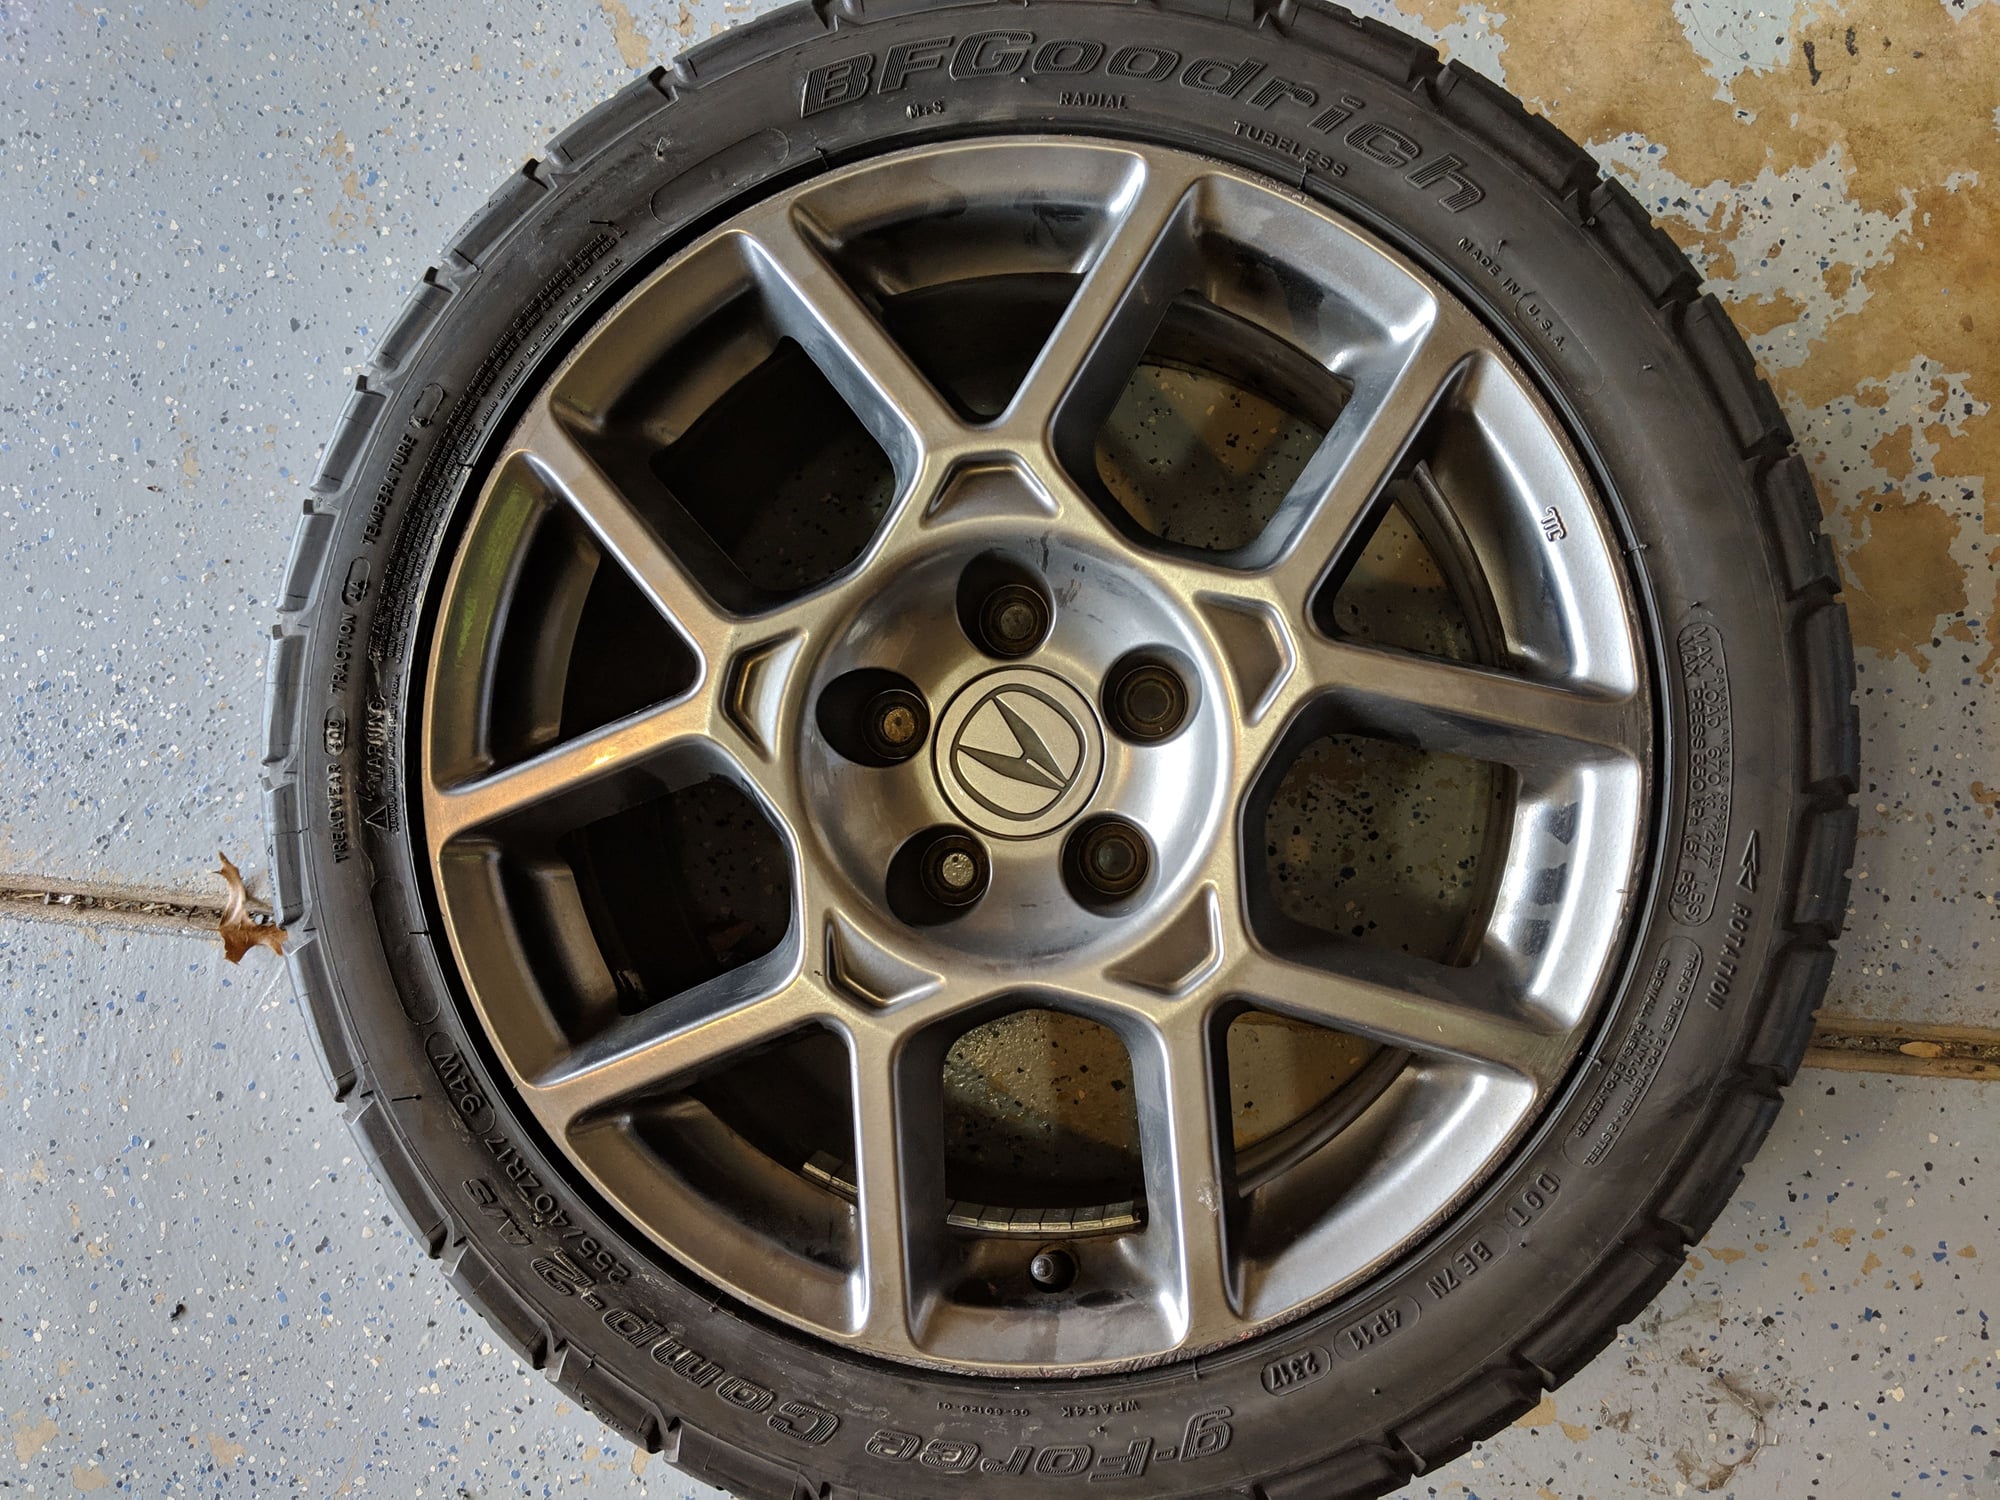 Wheels and Tires/Axles - SOLD: TL Type S wheels - Used - 2004 to 2008 Acura TL - Saint Louis, MO 63026, United States